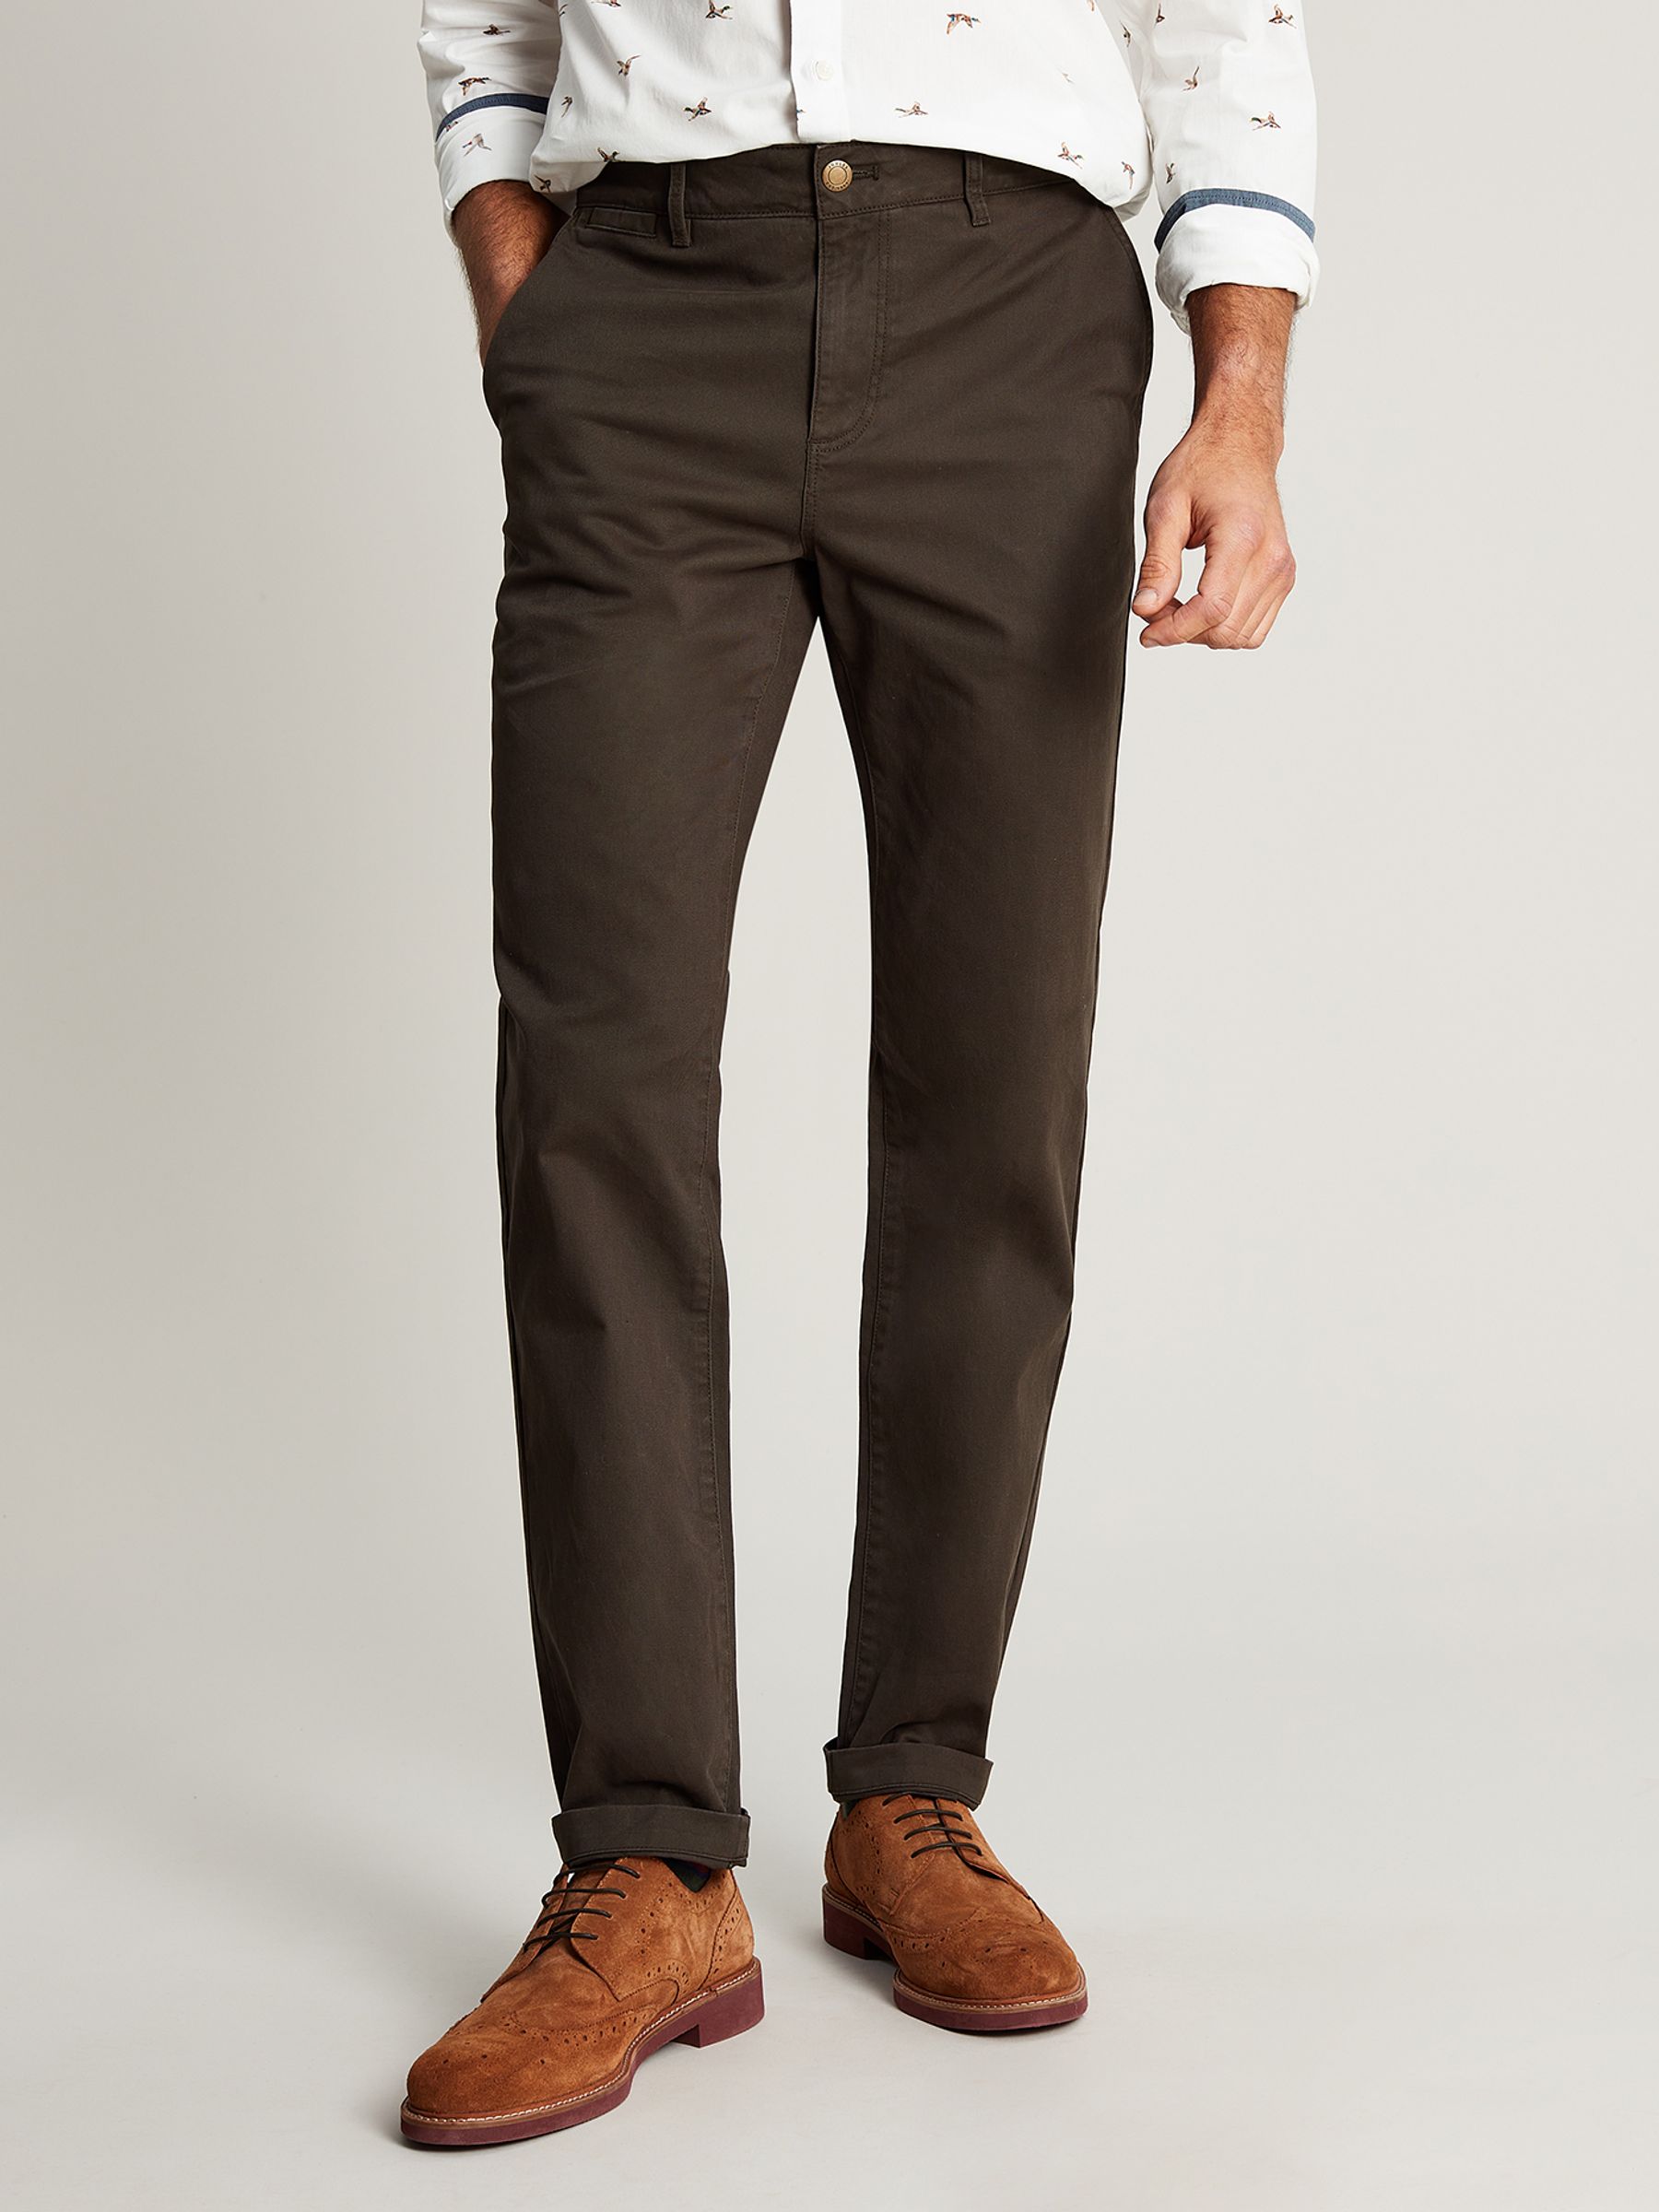 Buy Stamford Khaki Slim Fit Chinos from the Joules online shop